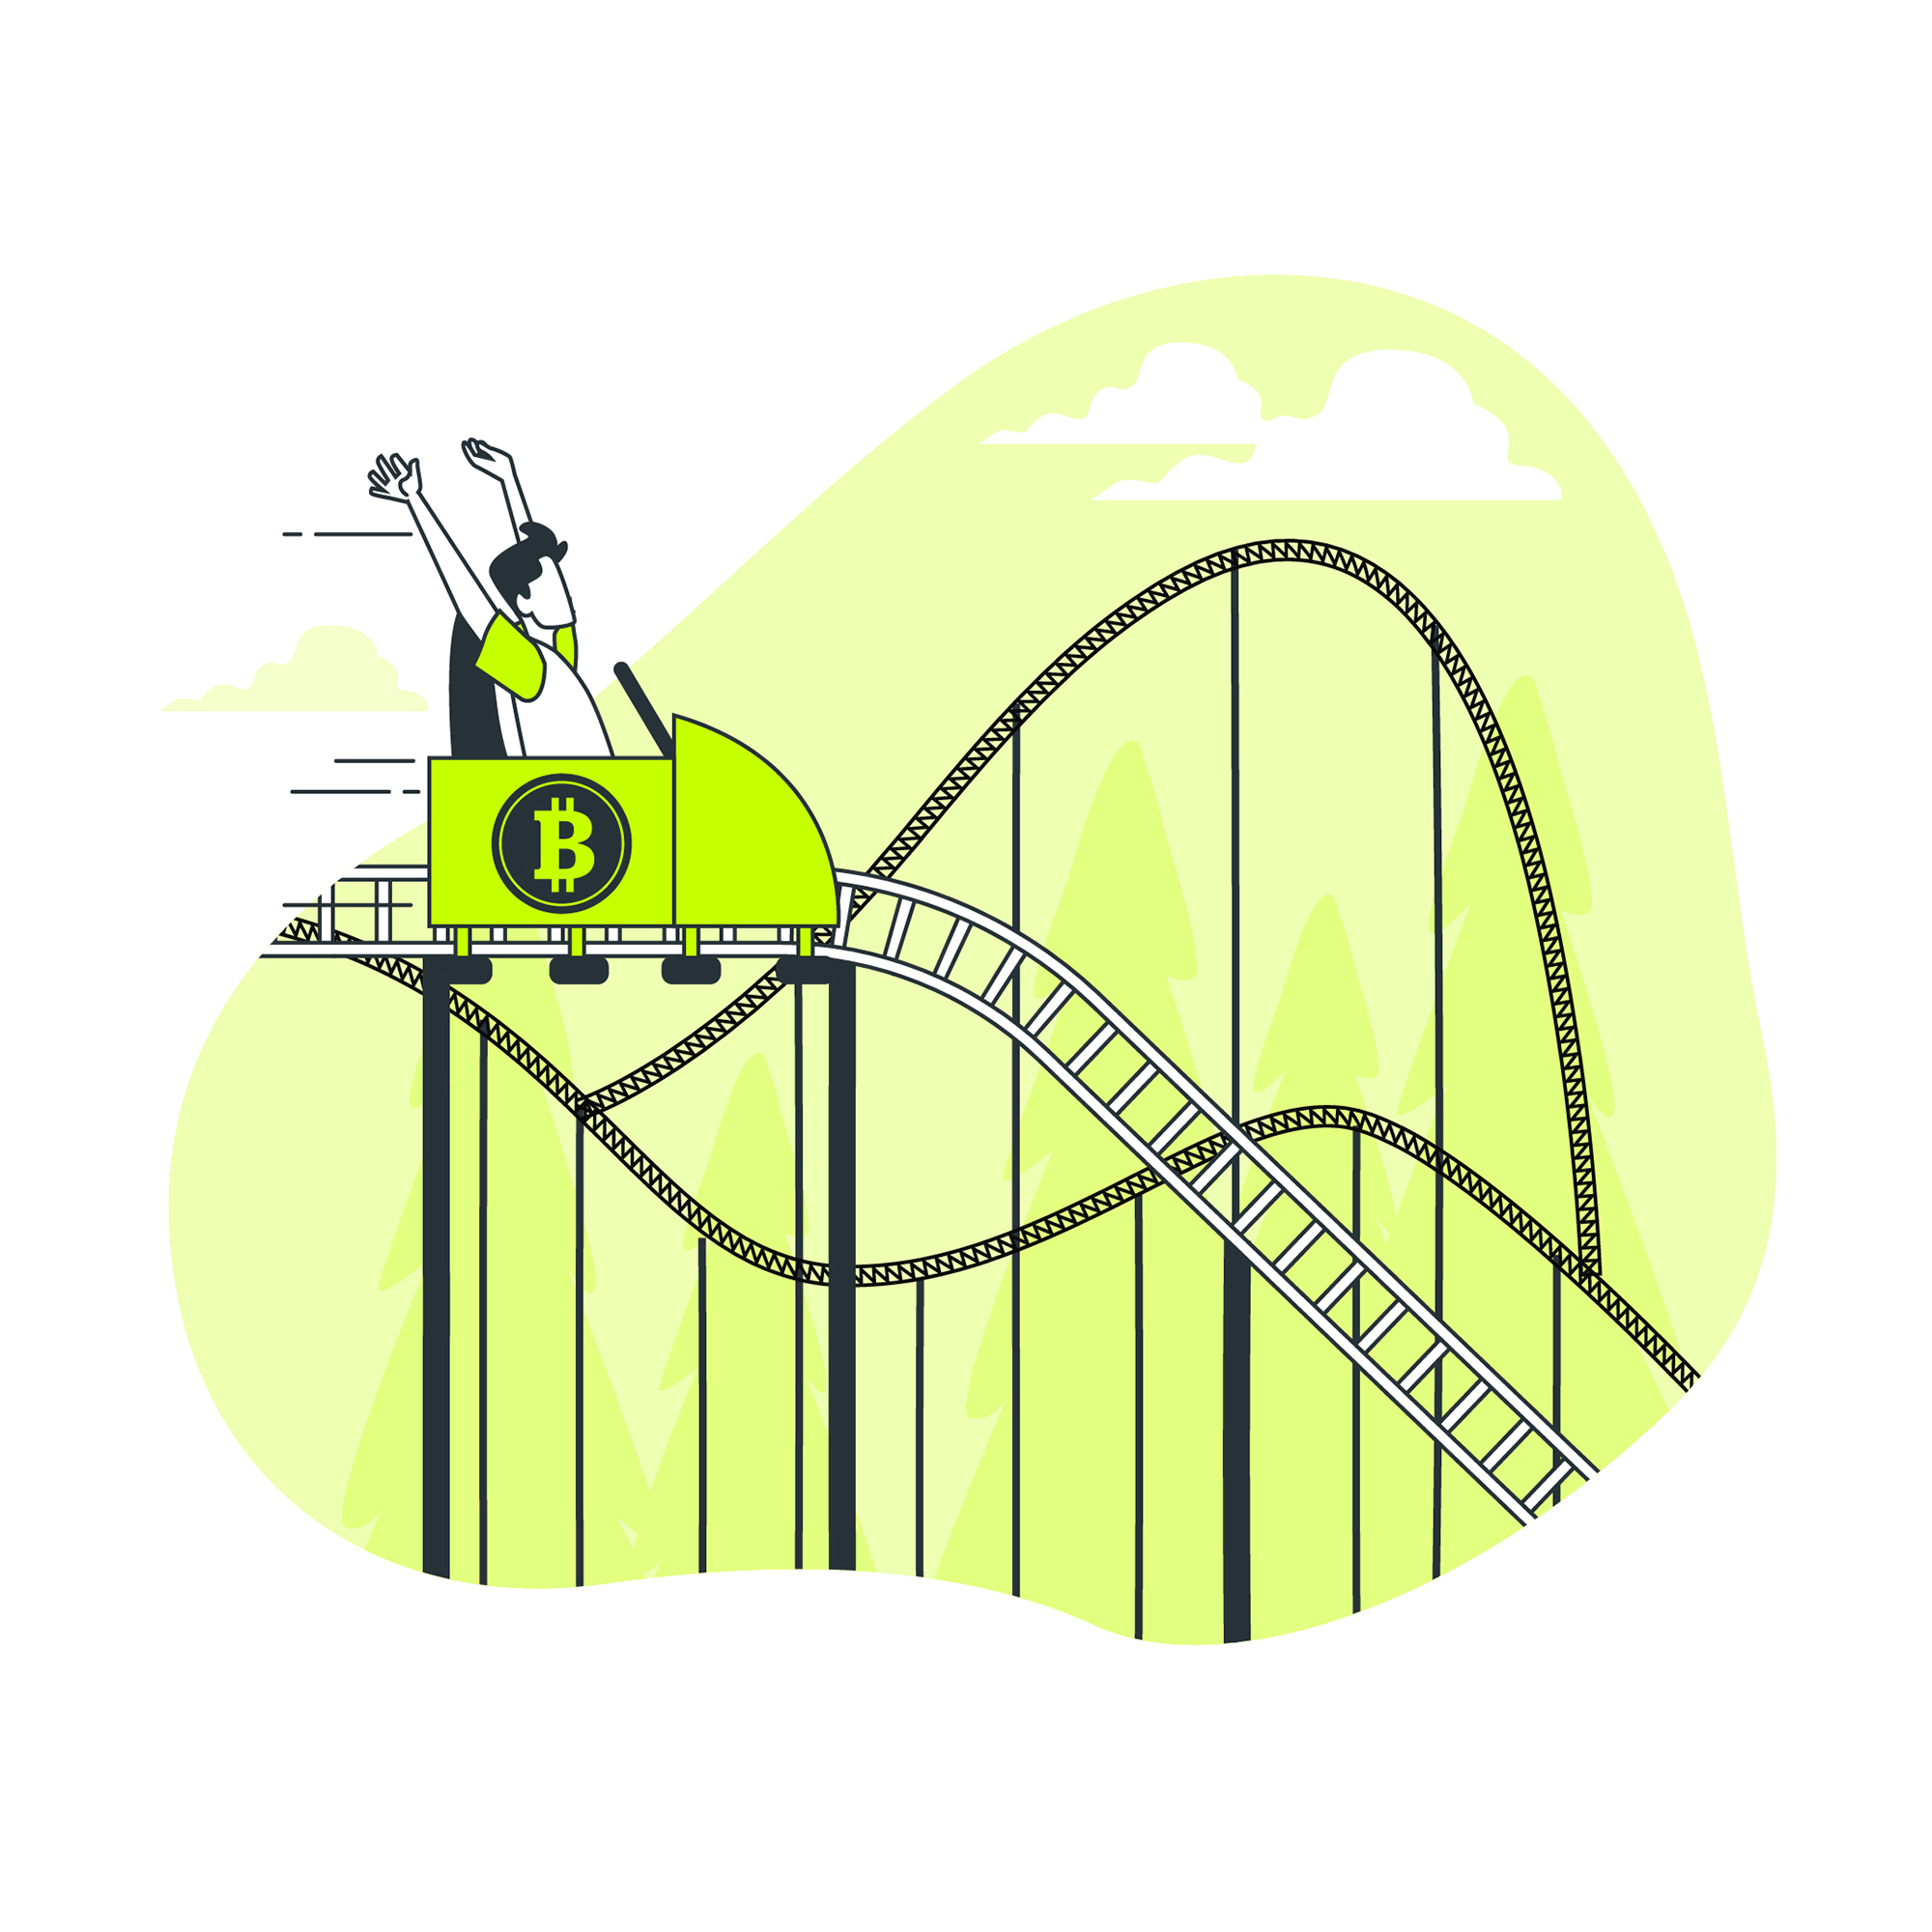 The Rollercoaster Ride of Bitcoin’s Value: A Look at the Last 30 Days